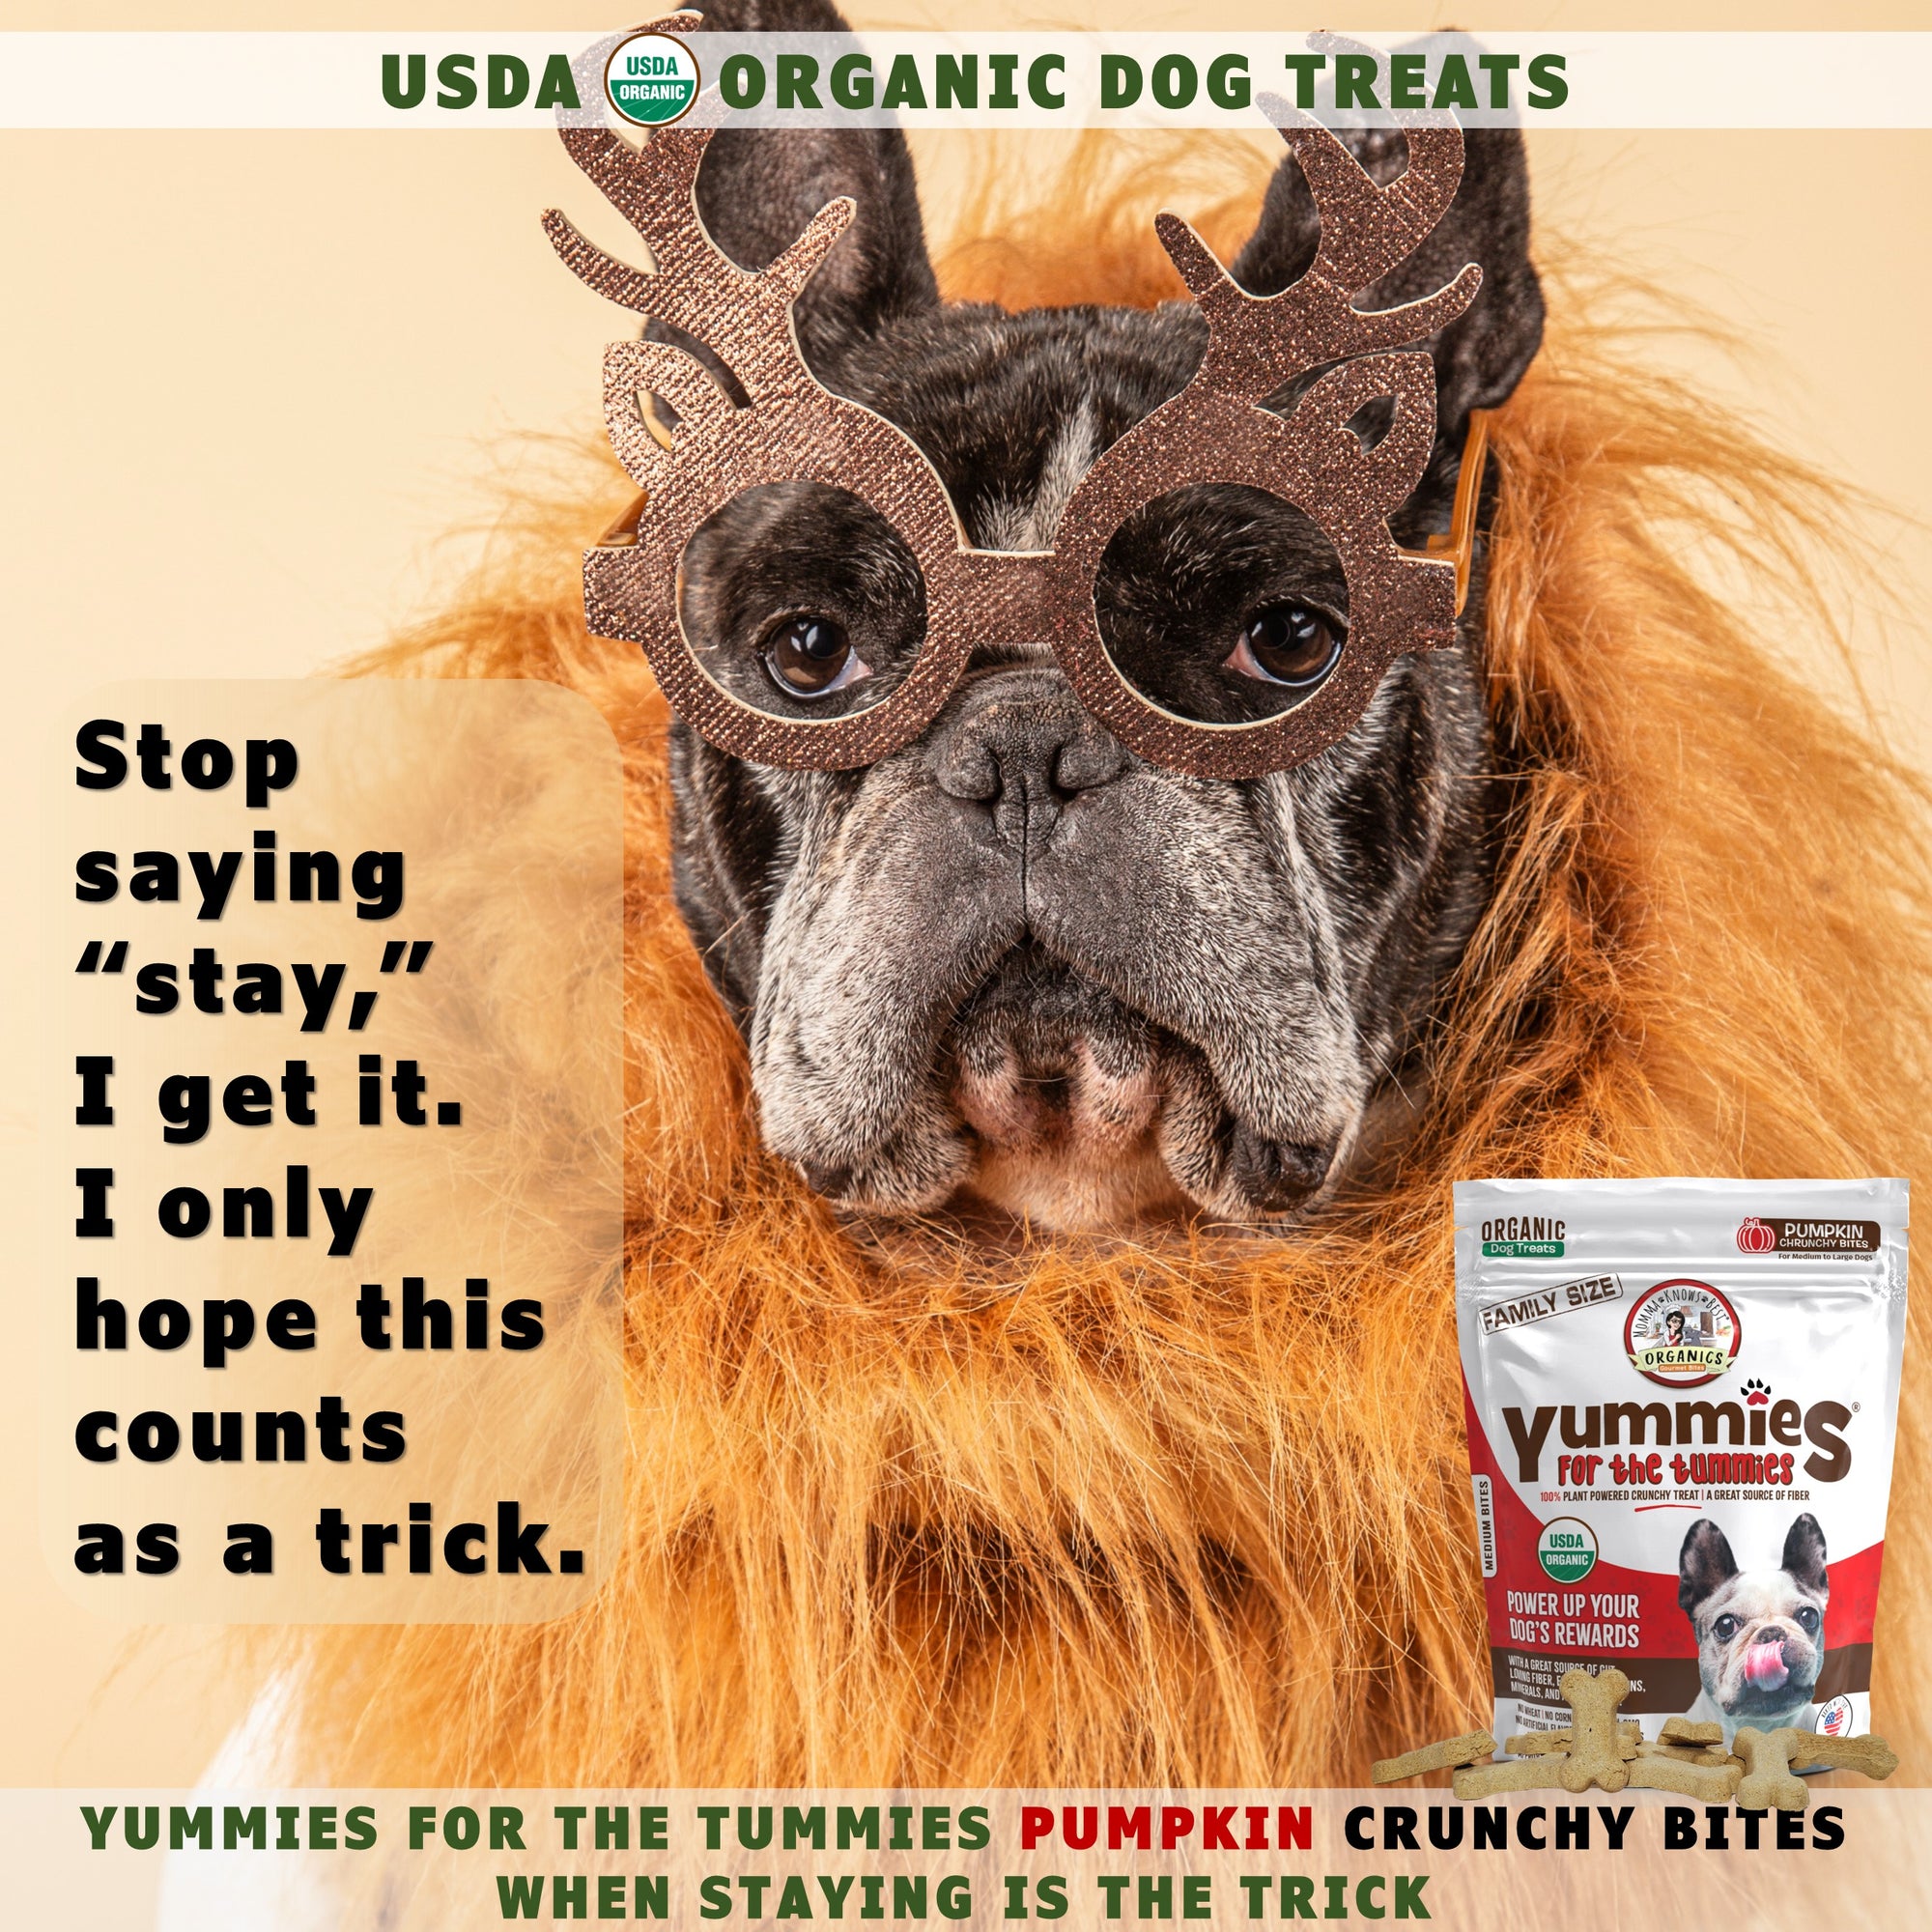 A dog wearing a garment next to a bag of USDA organic pumpkin dog cookies Yummies for the Tummies by Momma Knows Best